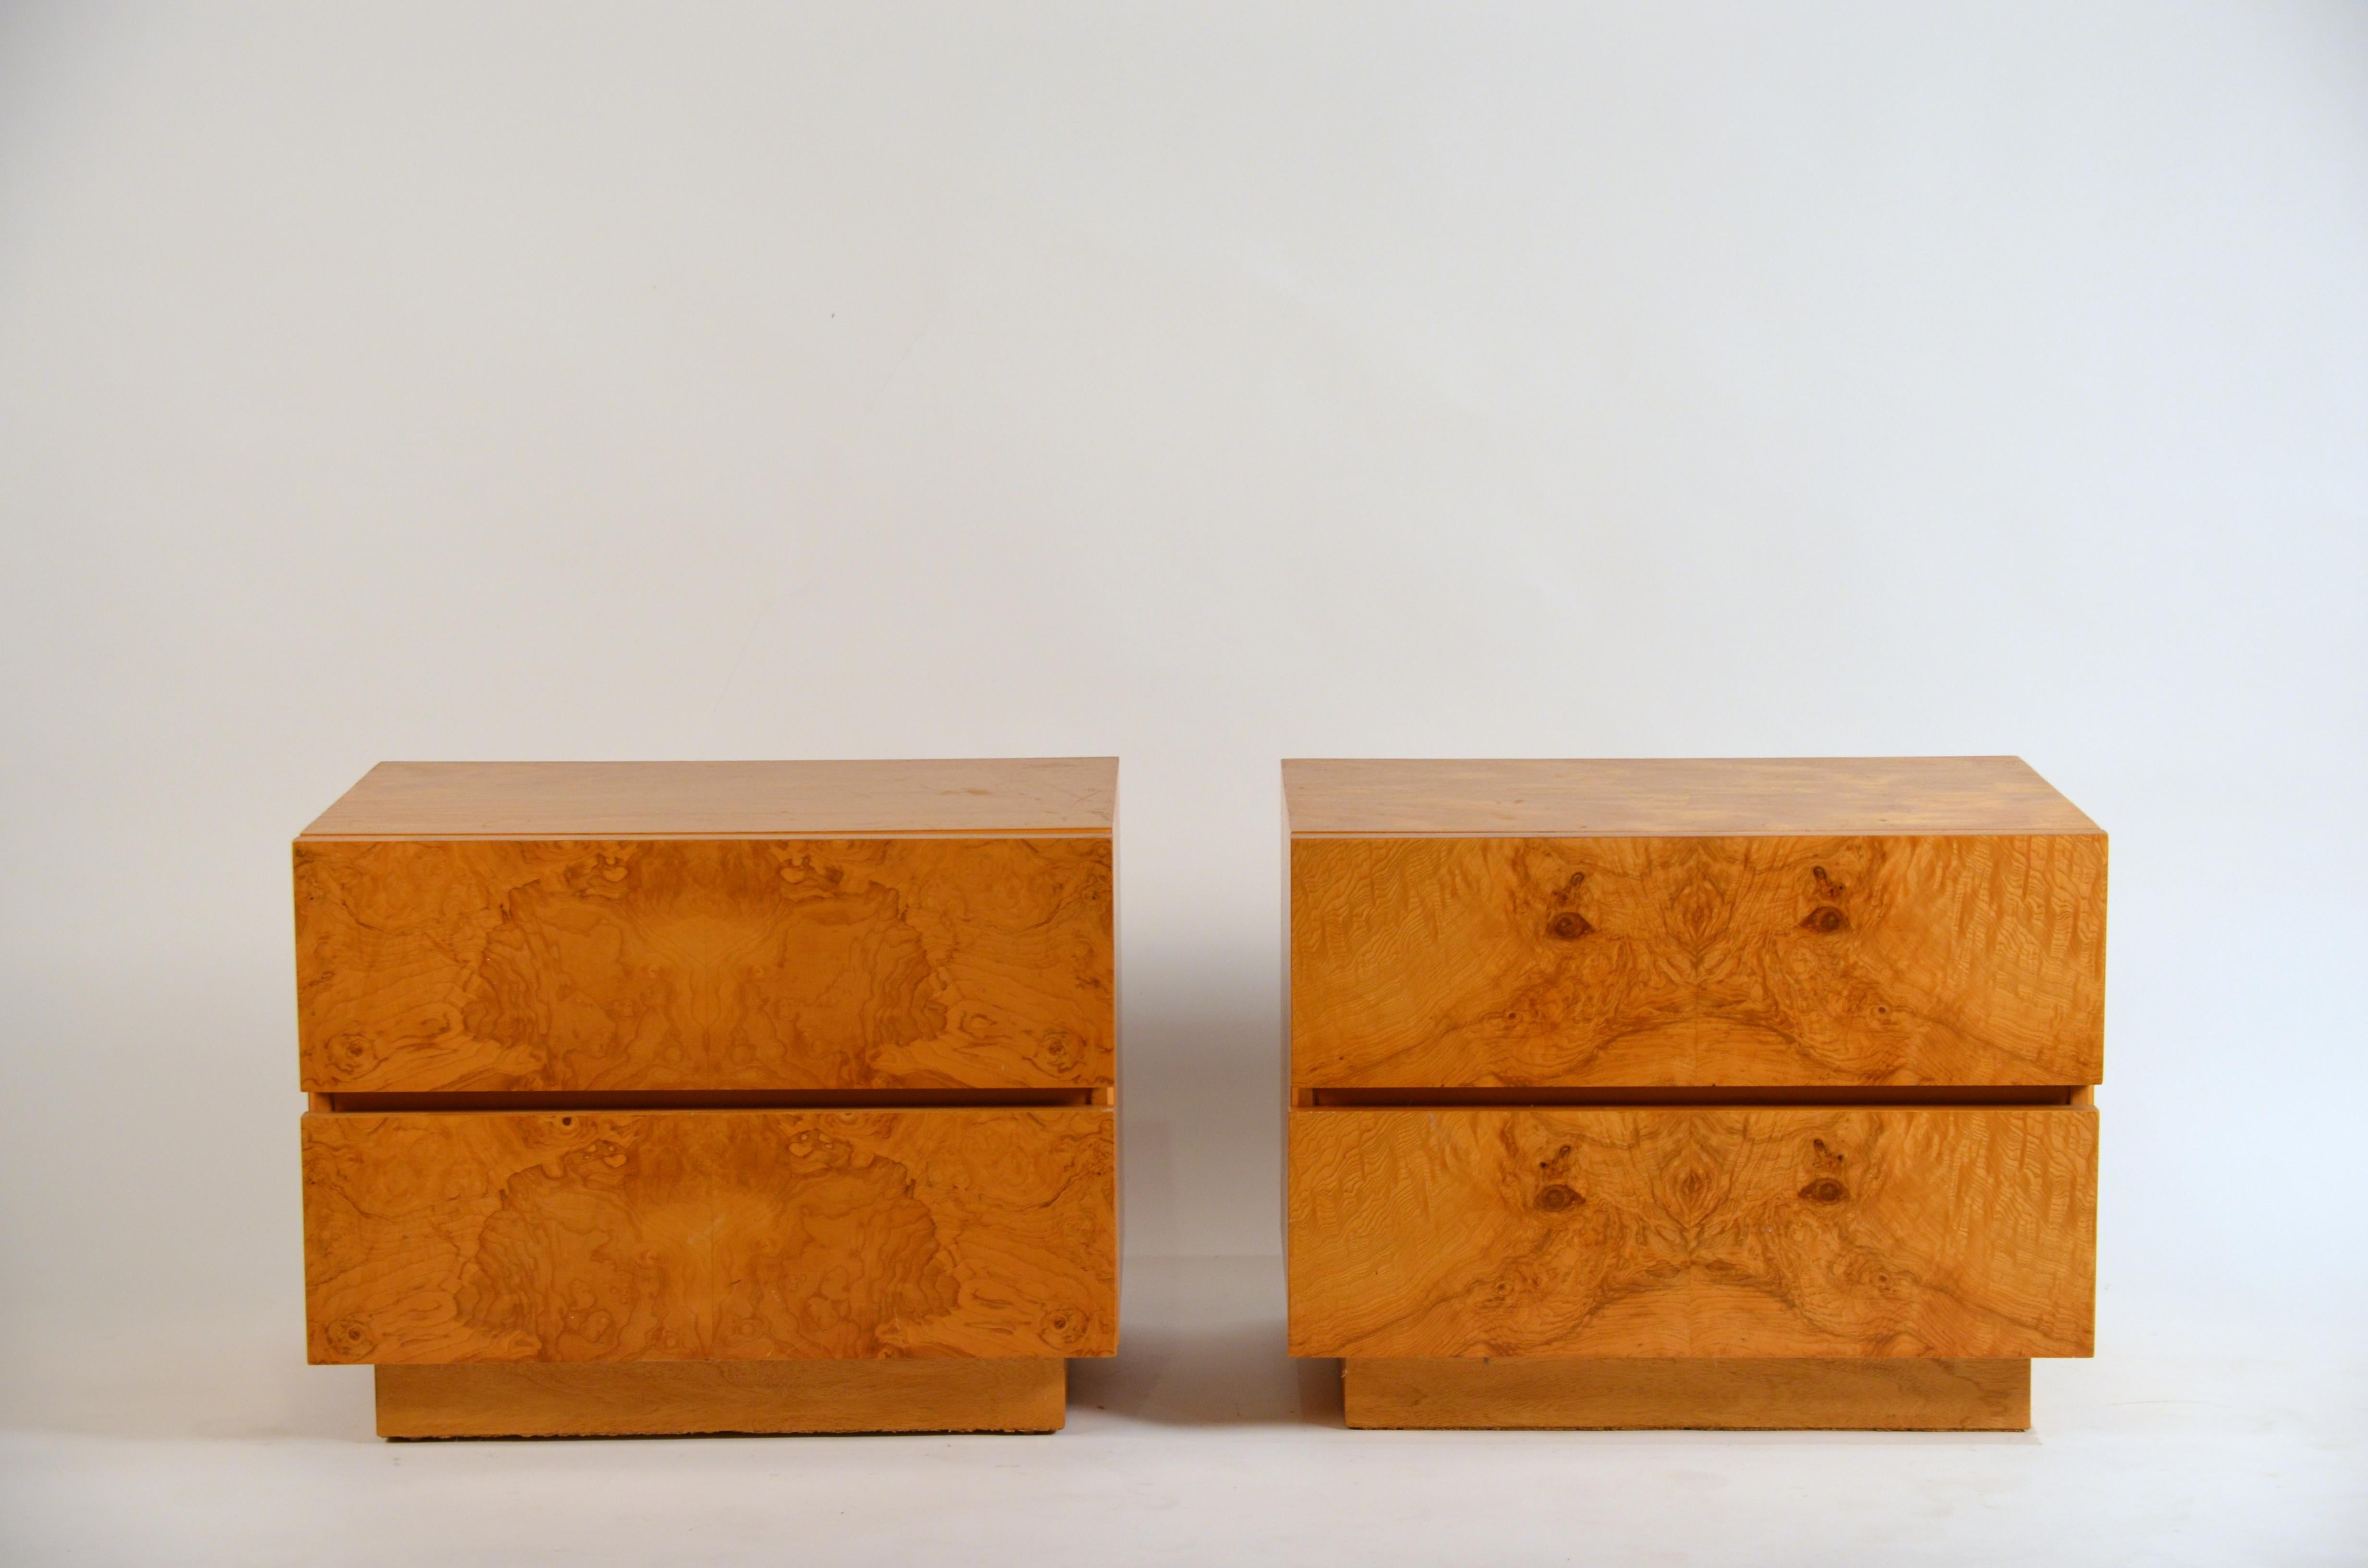 Pair of minimalist 'Amboine' burl wood nightstands by Design Frères.

Simple, functional design with 2 deep drawers per nightstand. Great Rorschach patterns on the of drawer fronts.

The bedroom picture is of a similar sized pair.